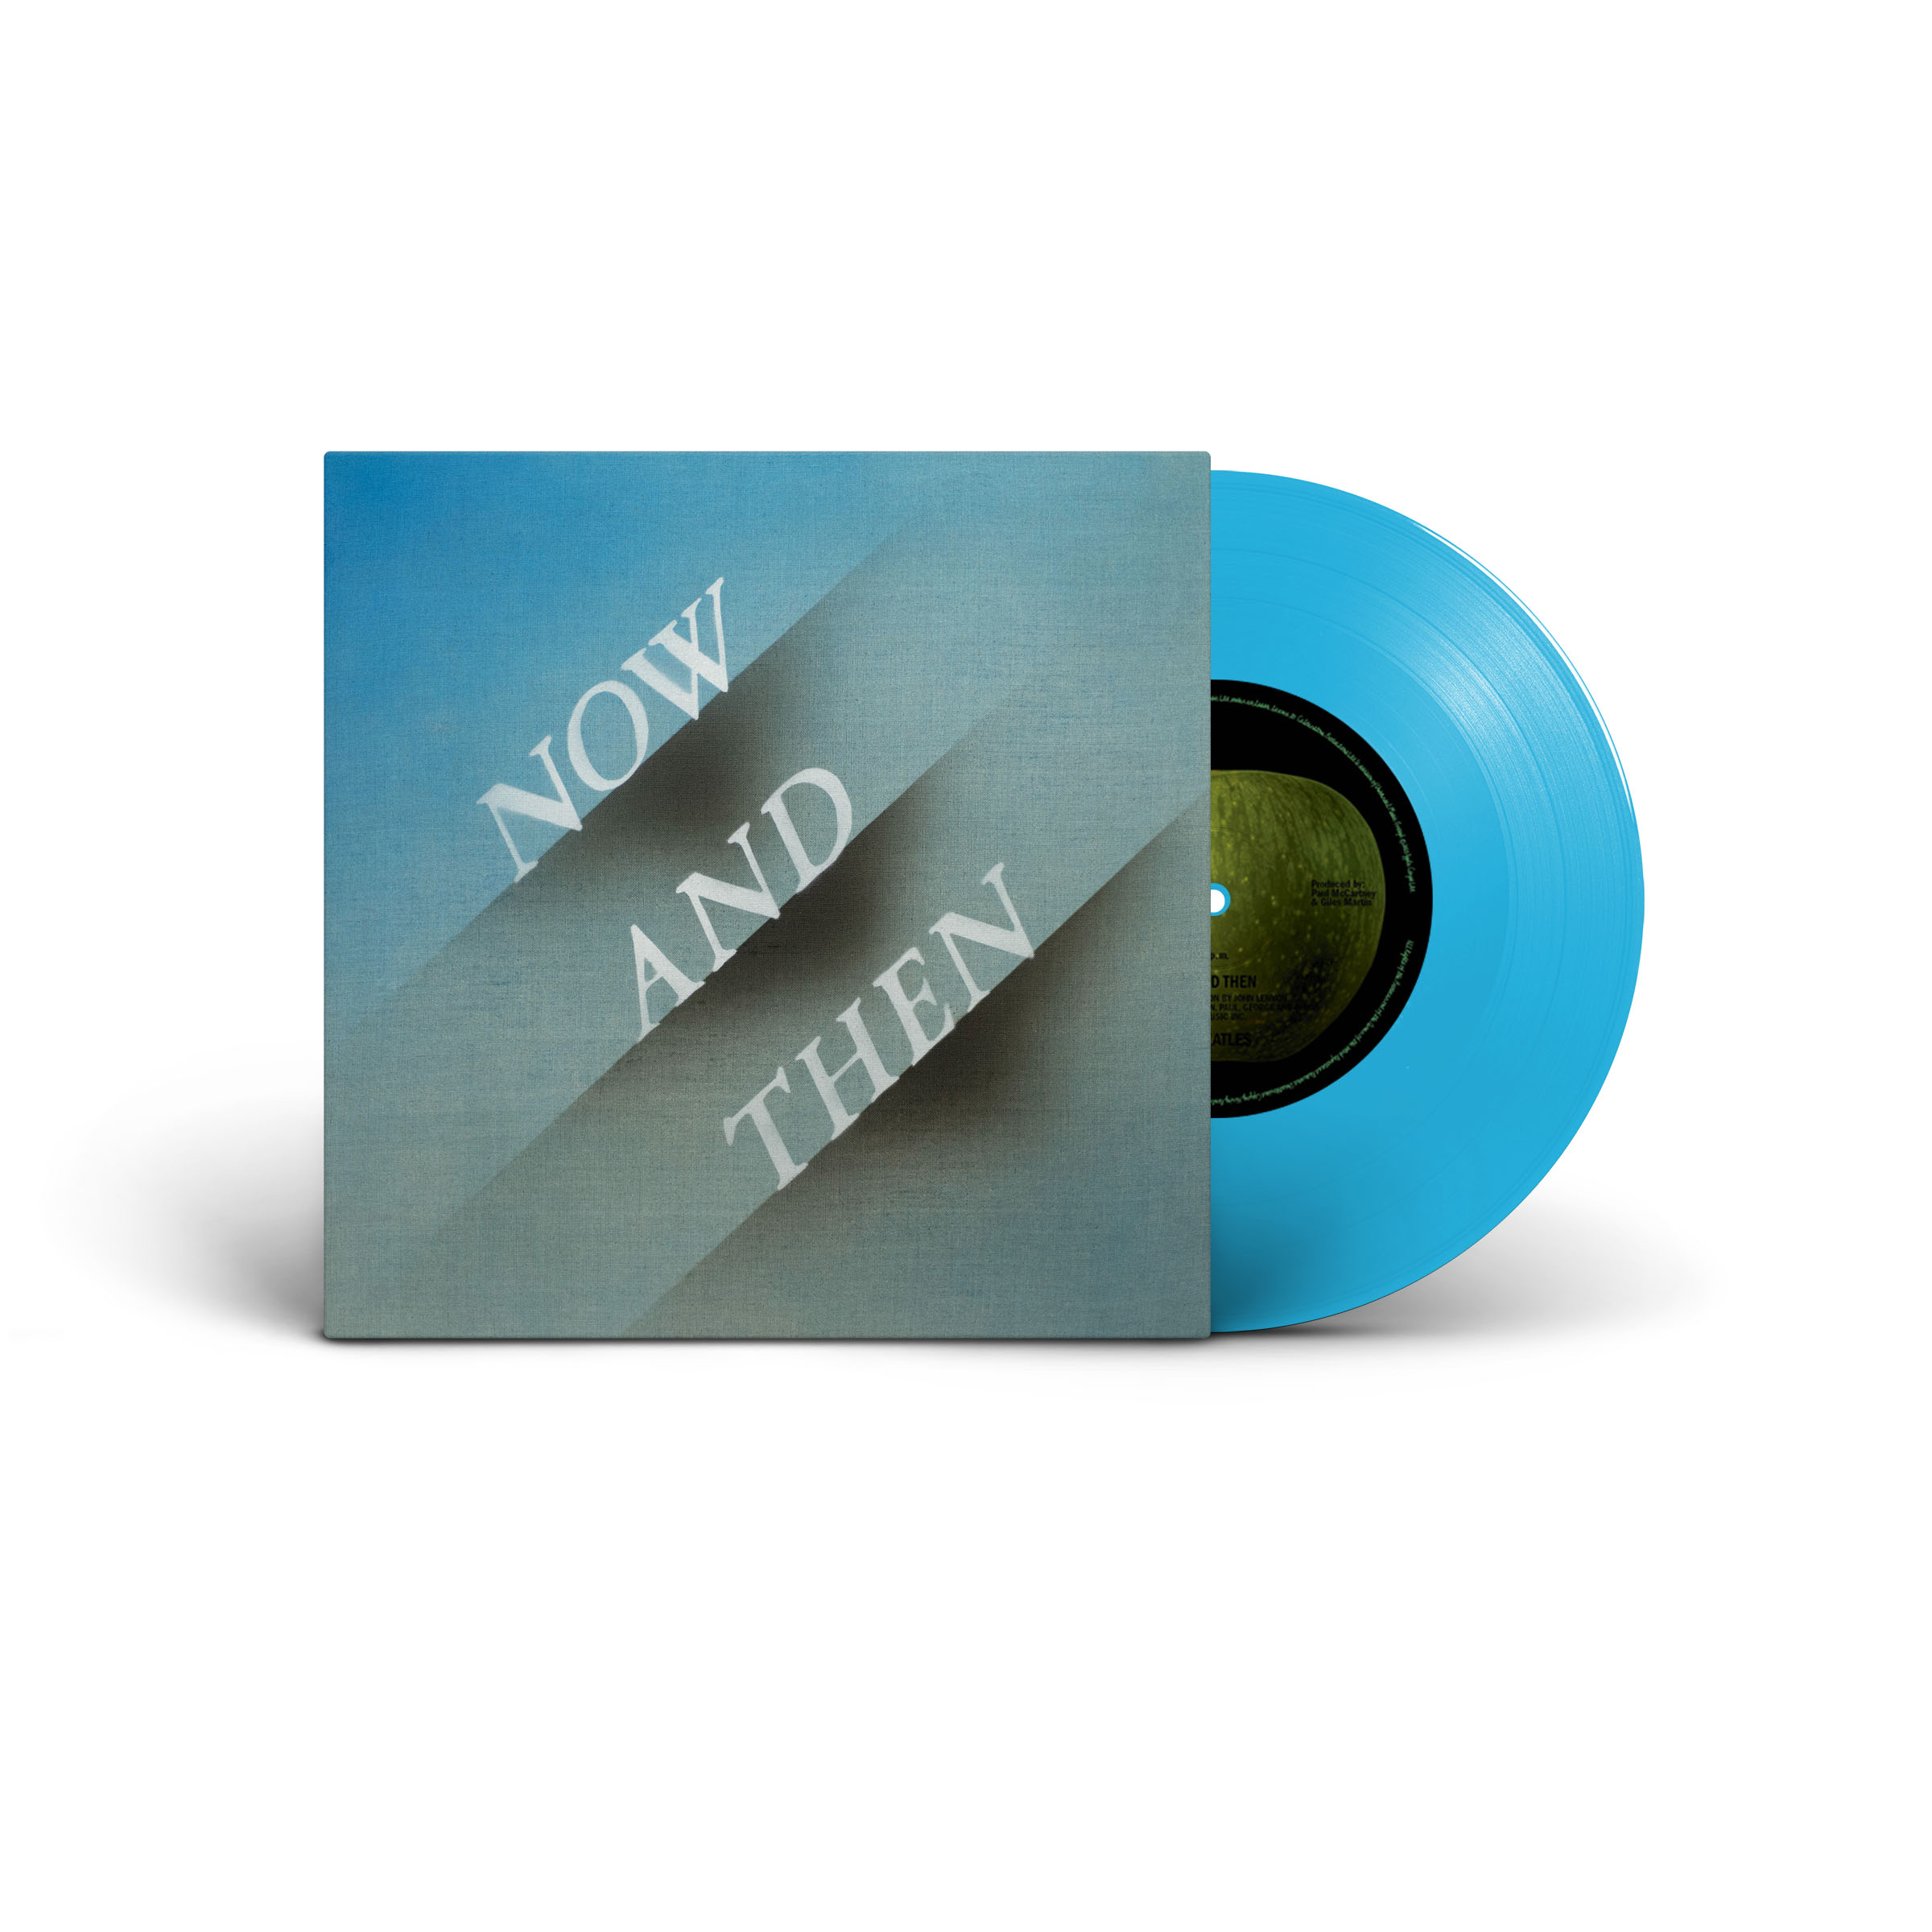 "Now And Then" 7" Single Blue